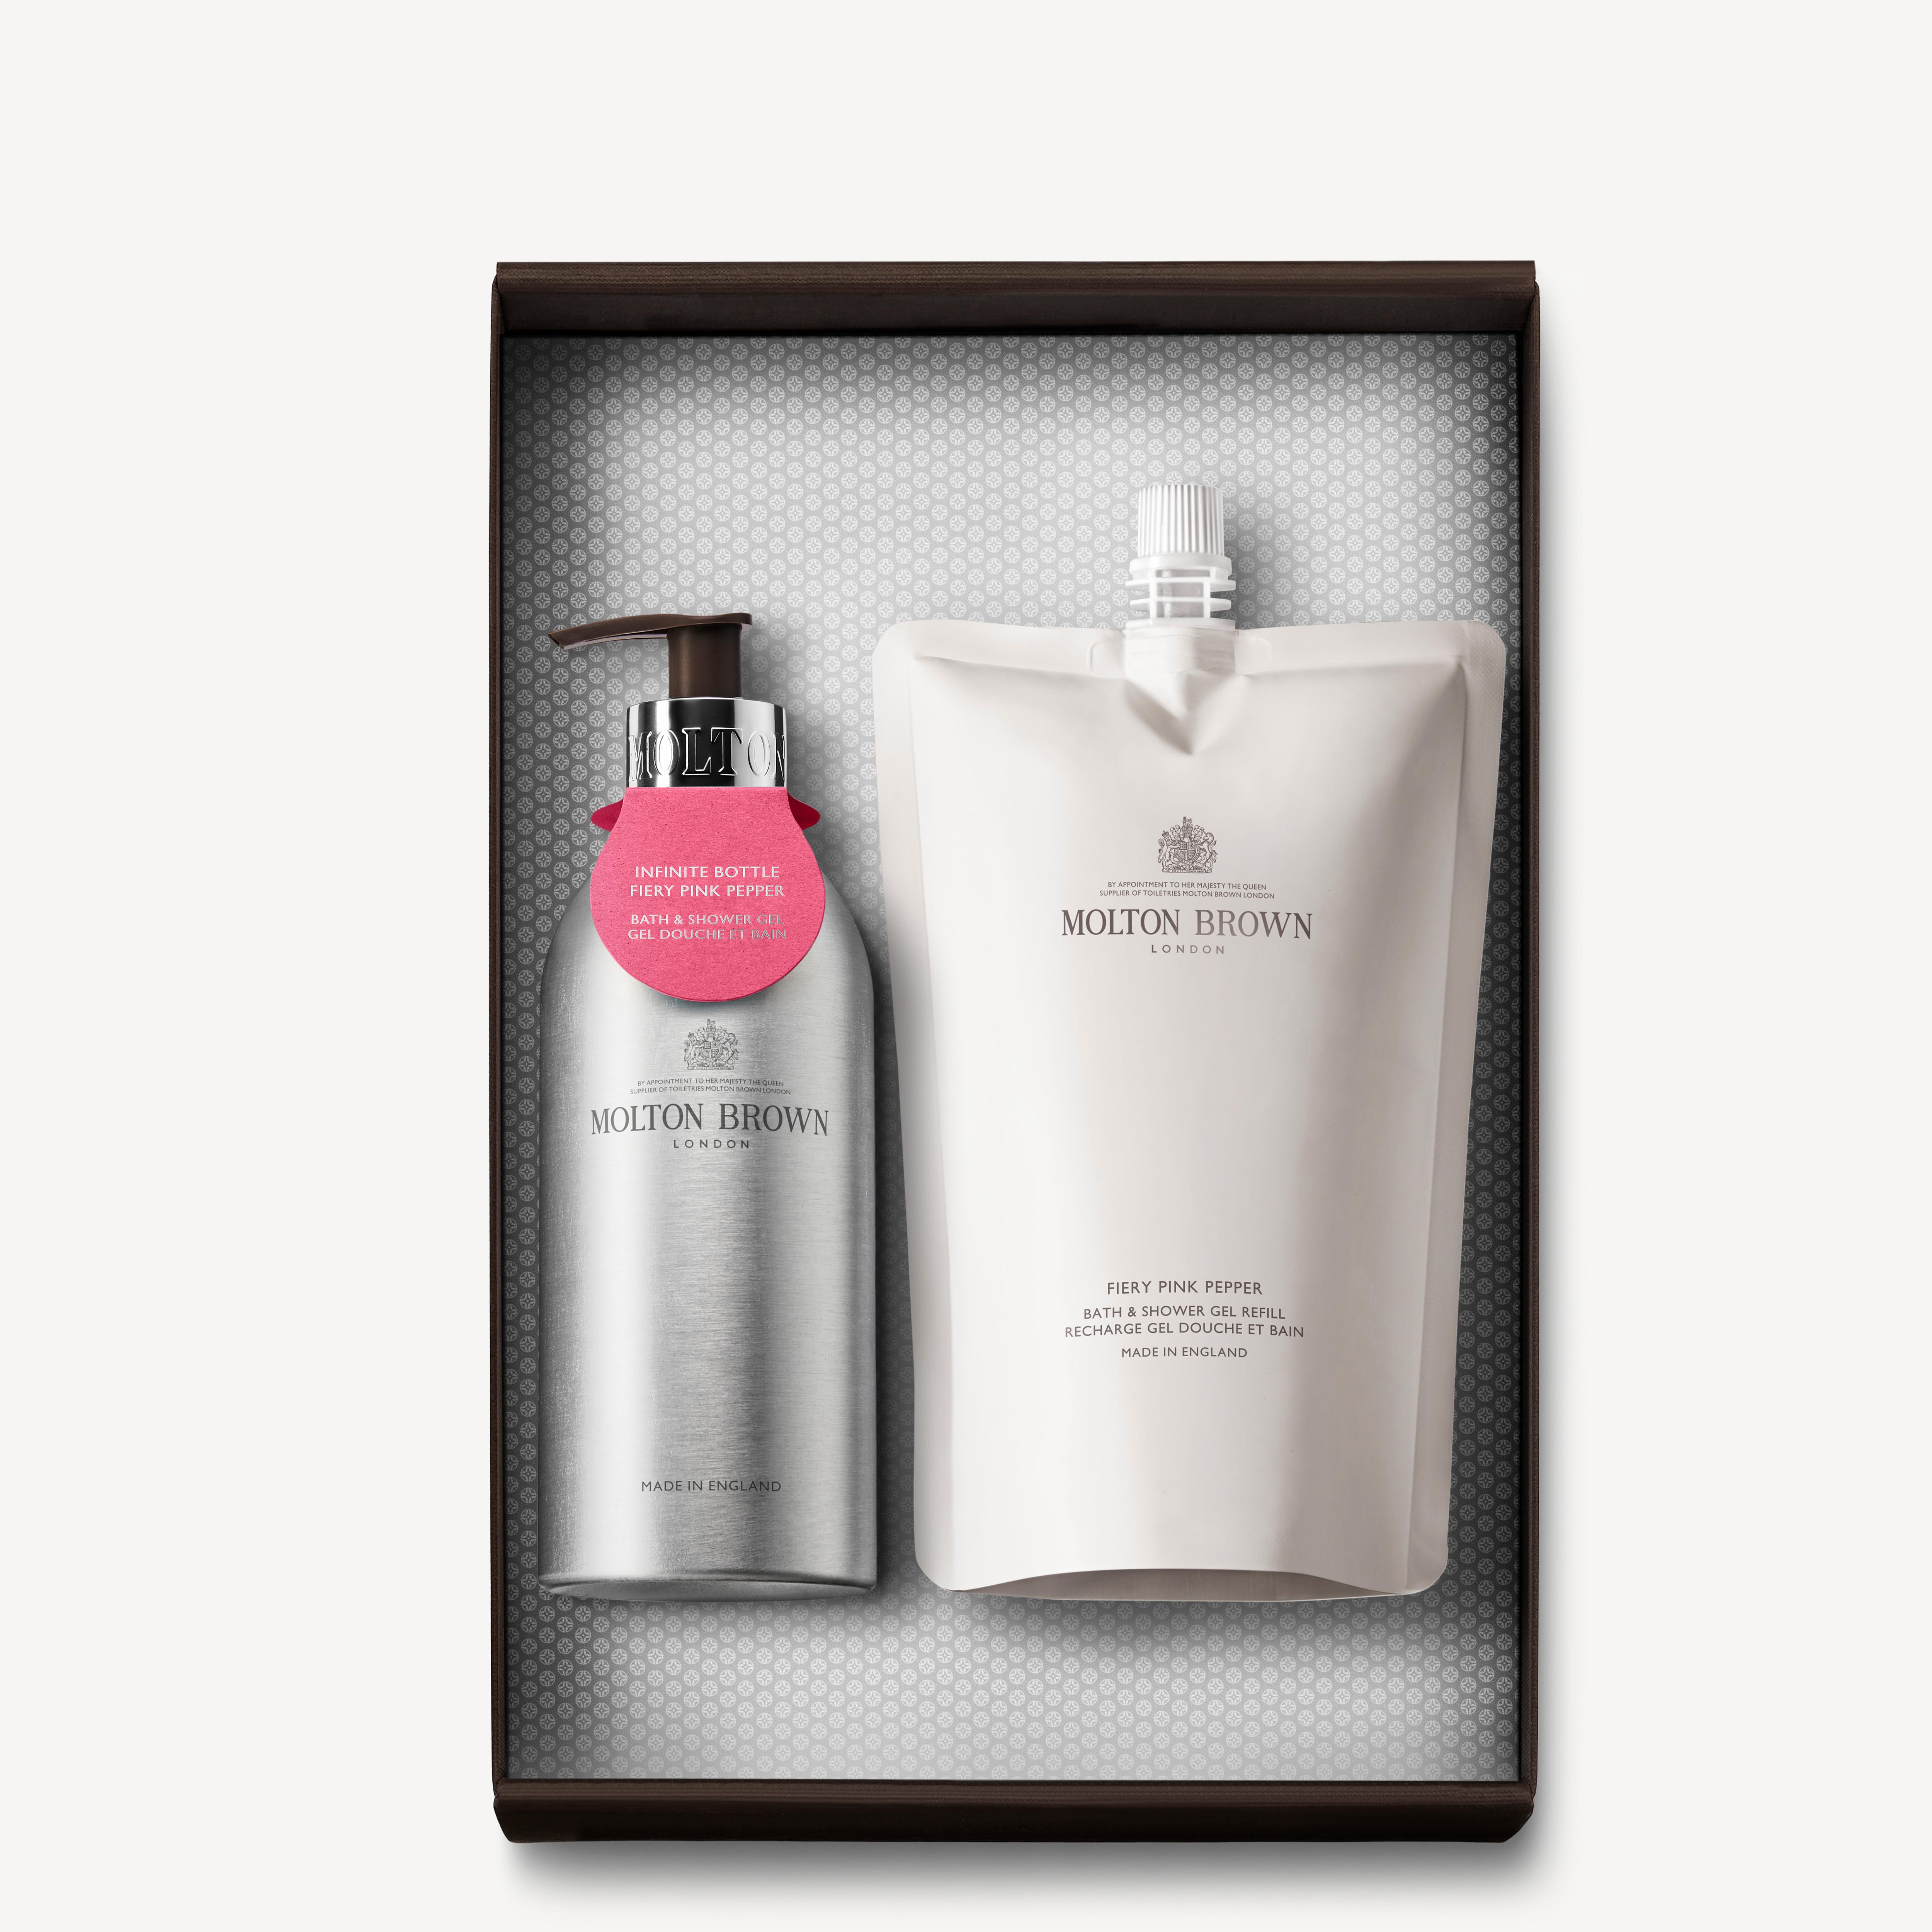 Molton Brown Fiery Pink Pepper Infinite Bottle Body Care Gift Set